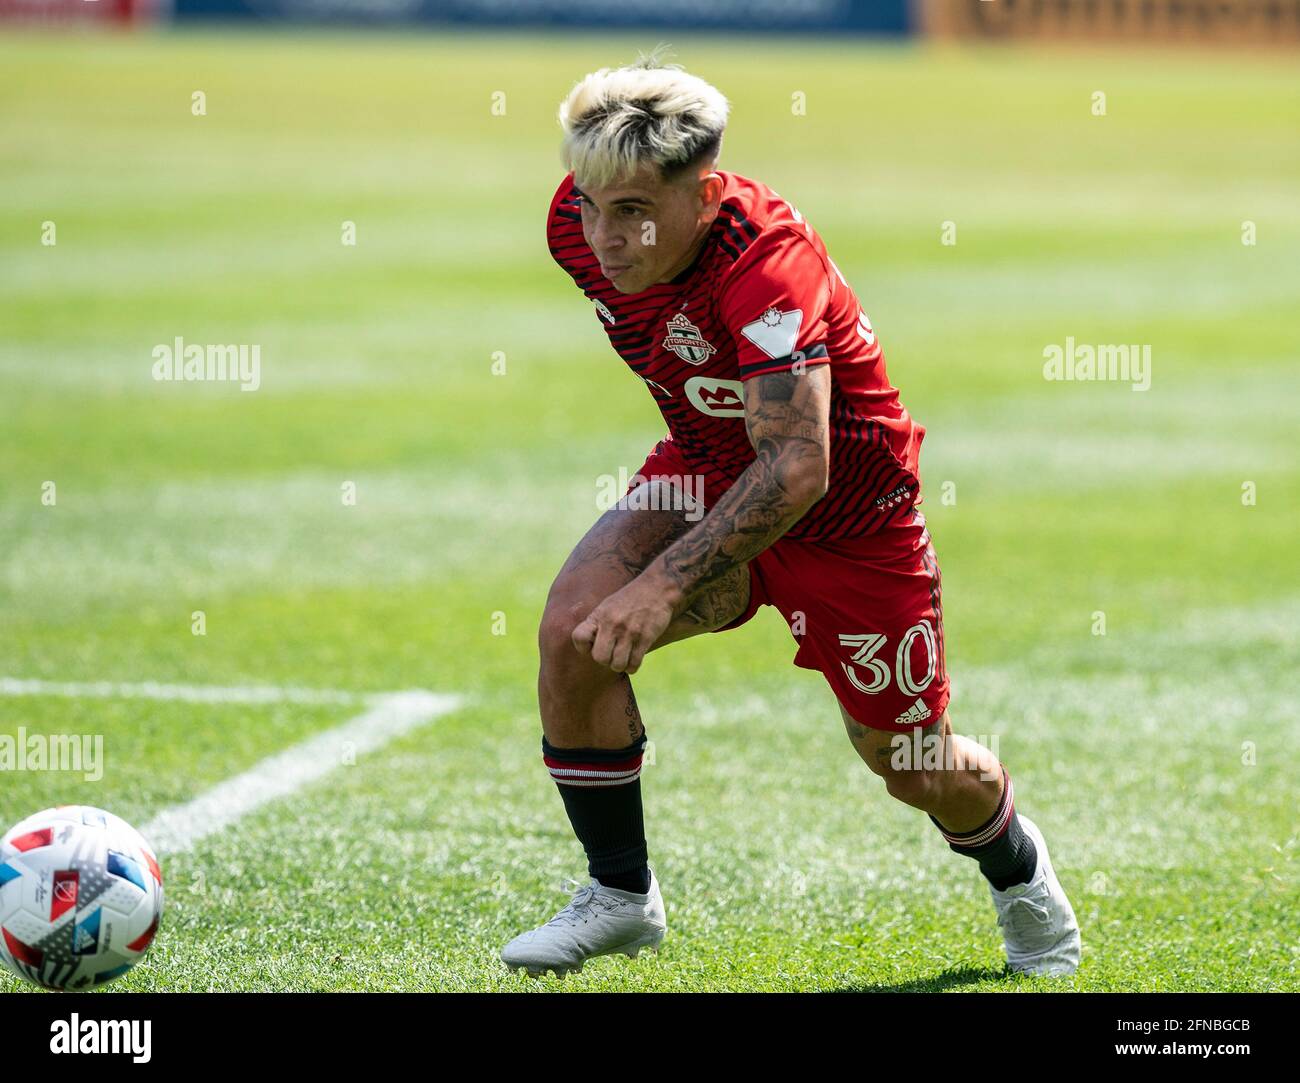 New York, United States. 15th May, 2021. Yeferson Soteldo (30) of Toronto FC  controls ball during MLS regular game against NYCFC on Yankees Stadium.  Game ended in draw 1 - 1. (Photo